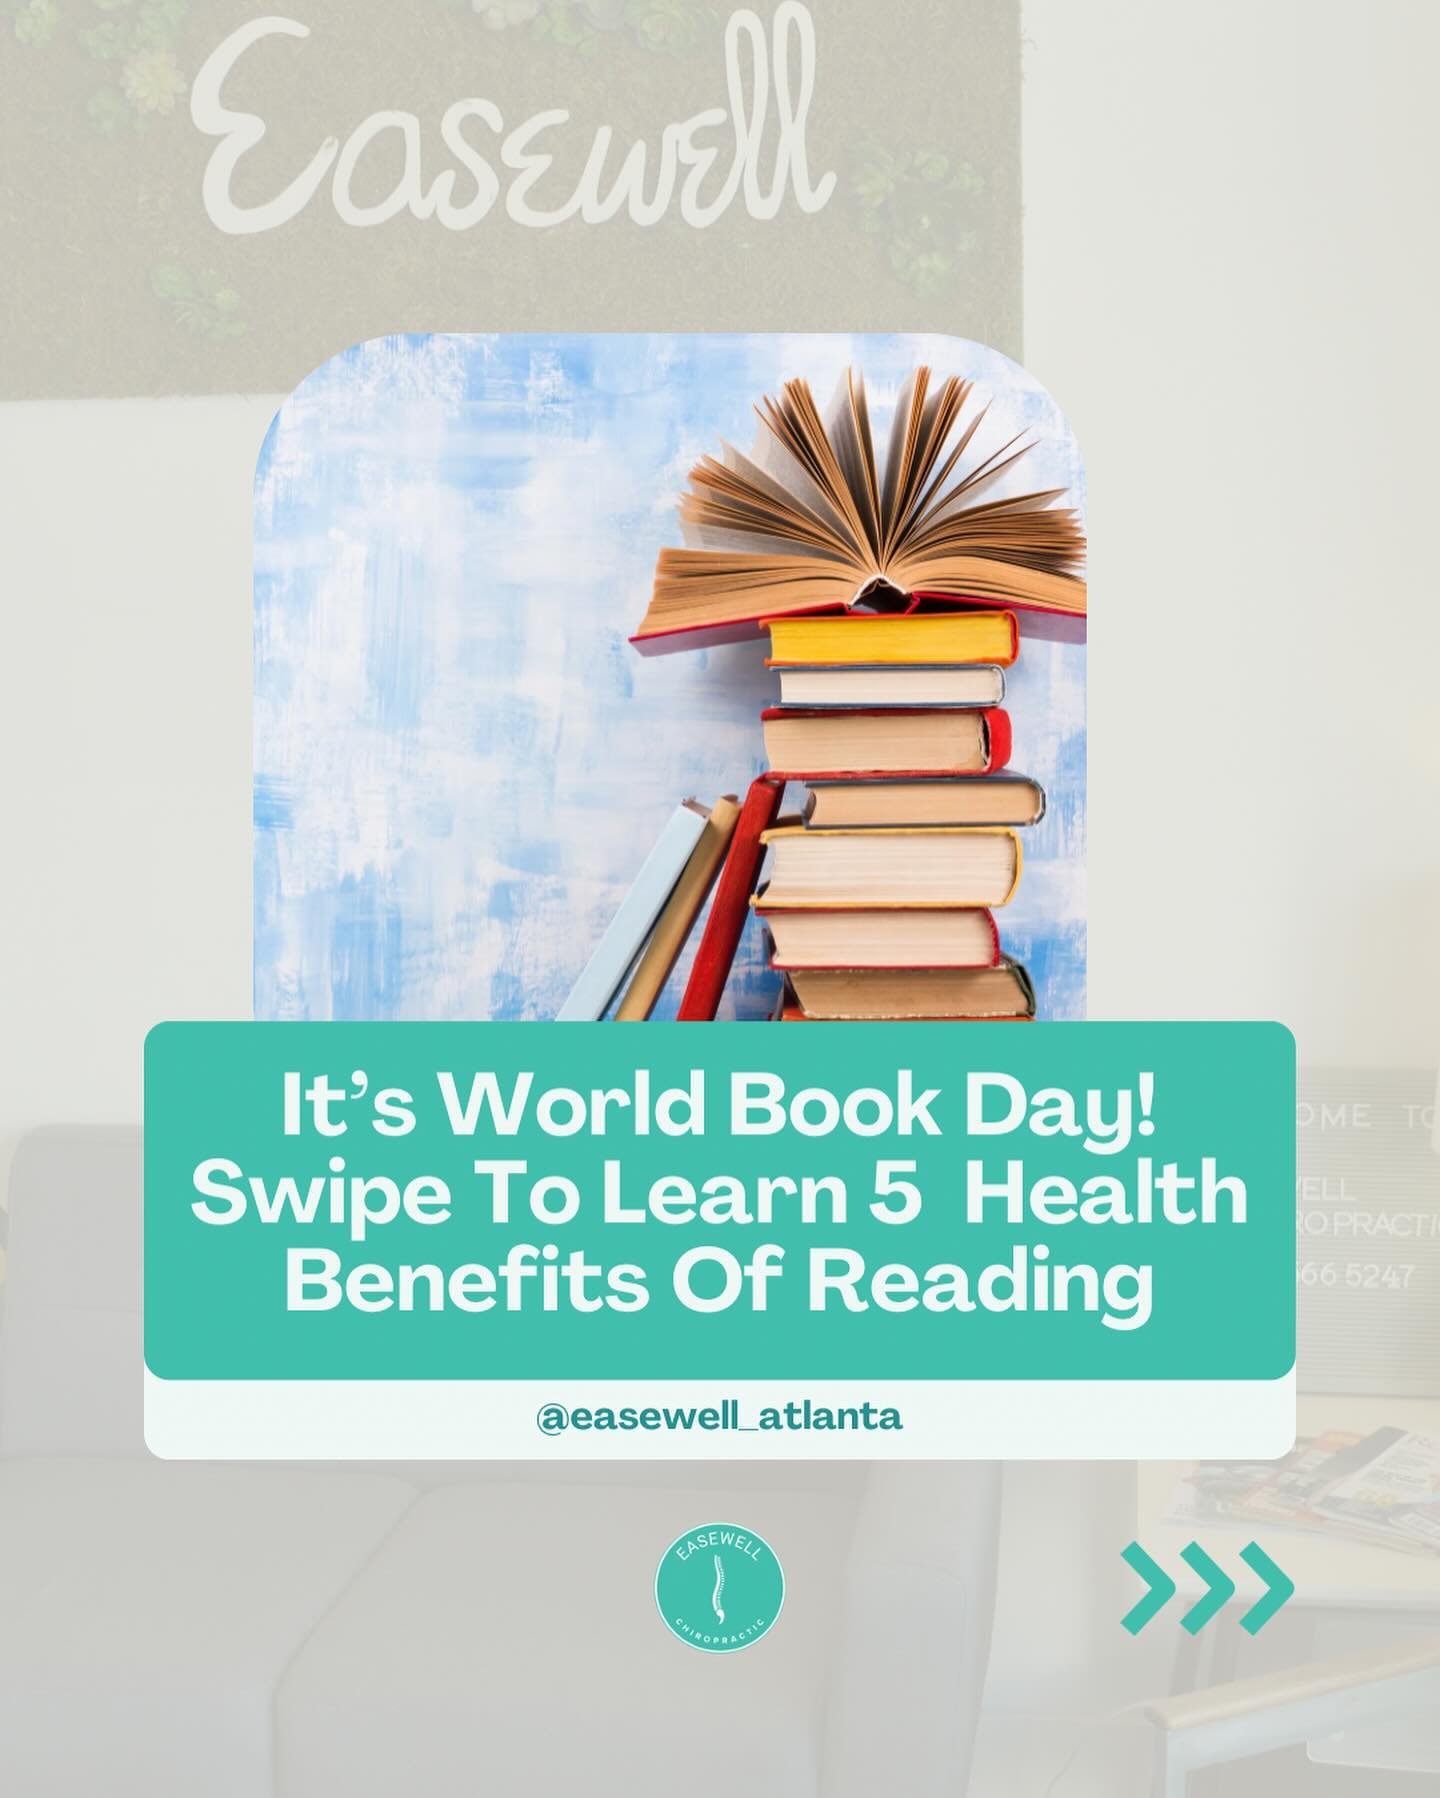 📚✨ Happy World Book Day! 🎉 Did you know that picking up a book can do more than just transport you to another world? Swipe to discover 5 incredible health benefits of reading that enhance your mind and body. From improving sleep to decreasing cogni